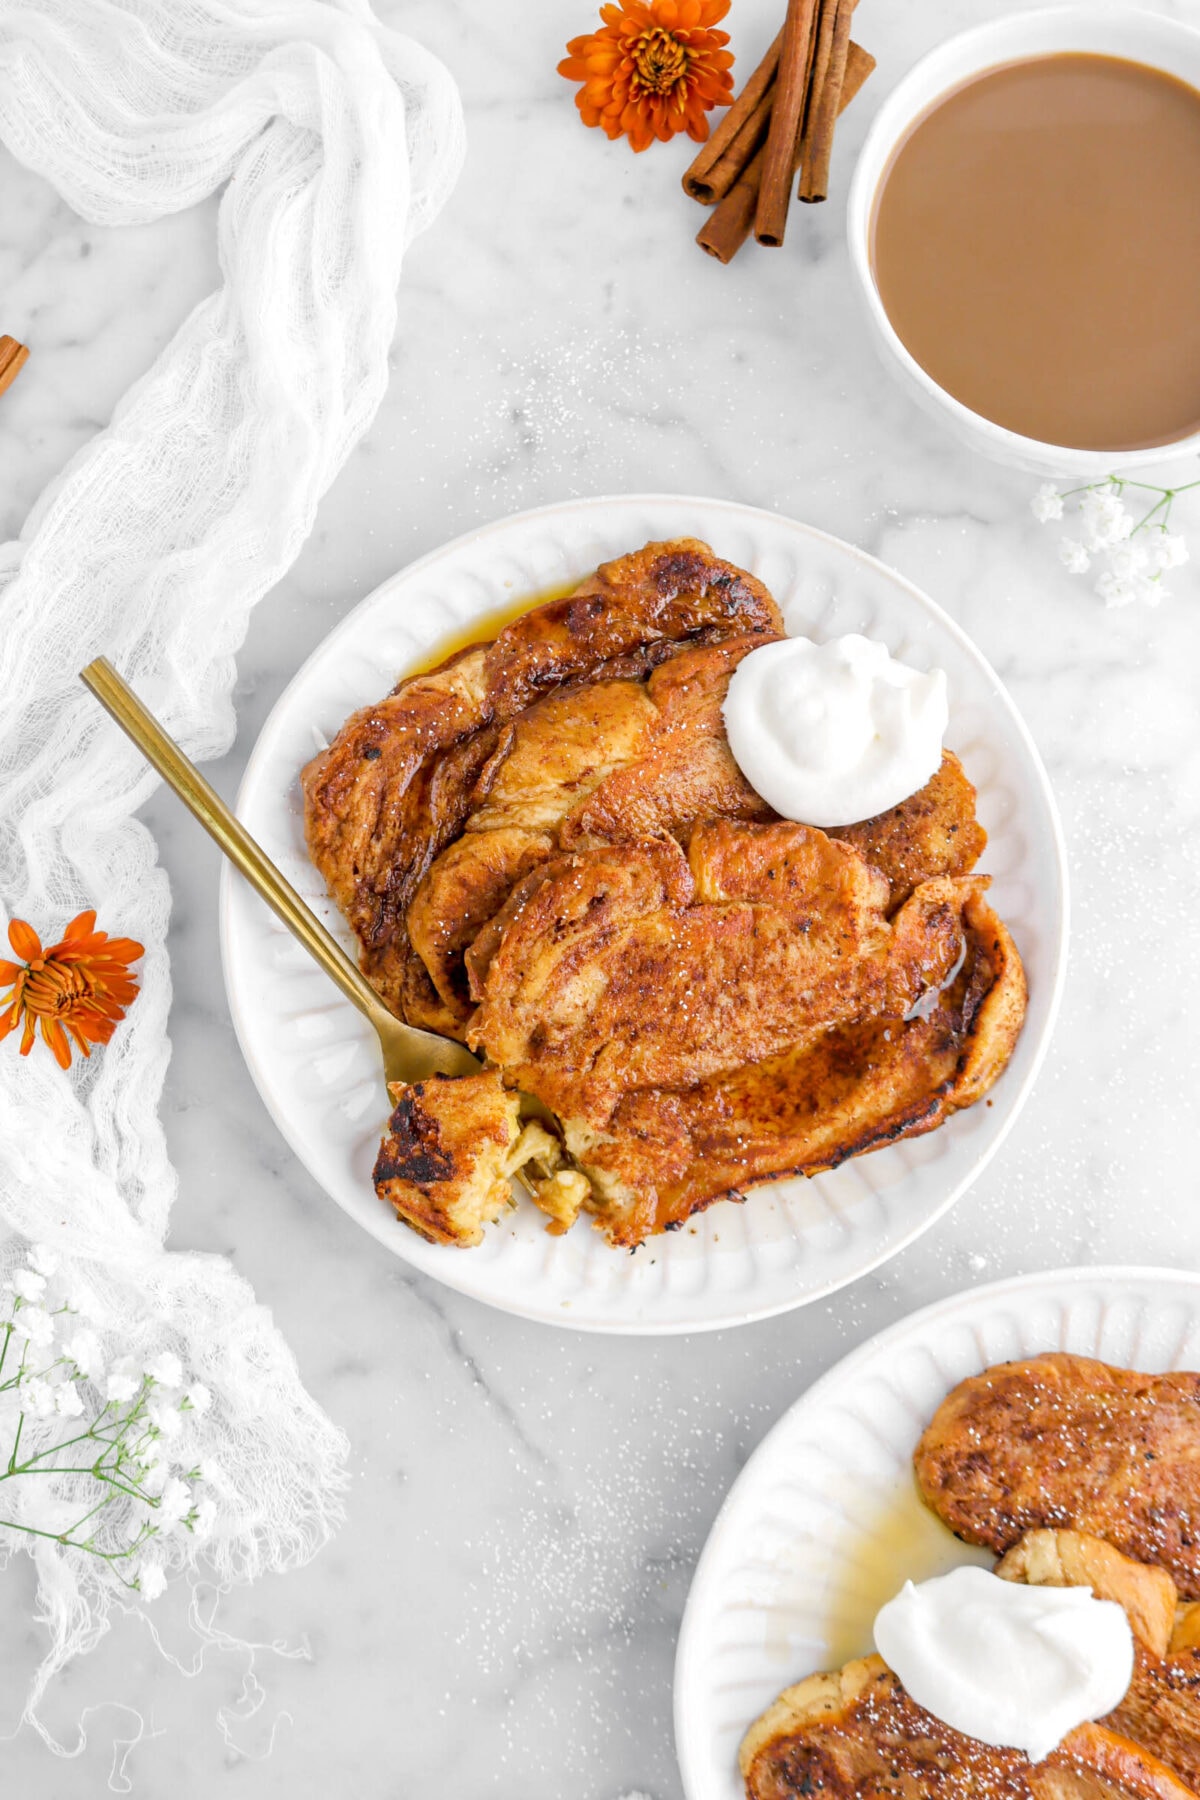 three slices of cinnamon french toast with gold fork beside, a mug of coffee, cinnamon sticks, flowers, a second plate, and white cheese cloth around on marble surface.